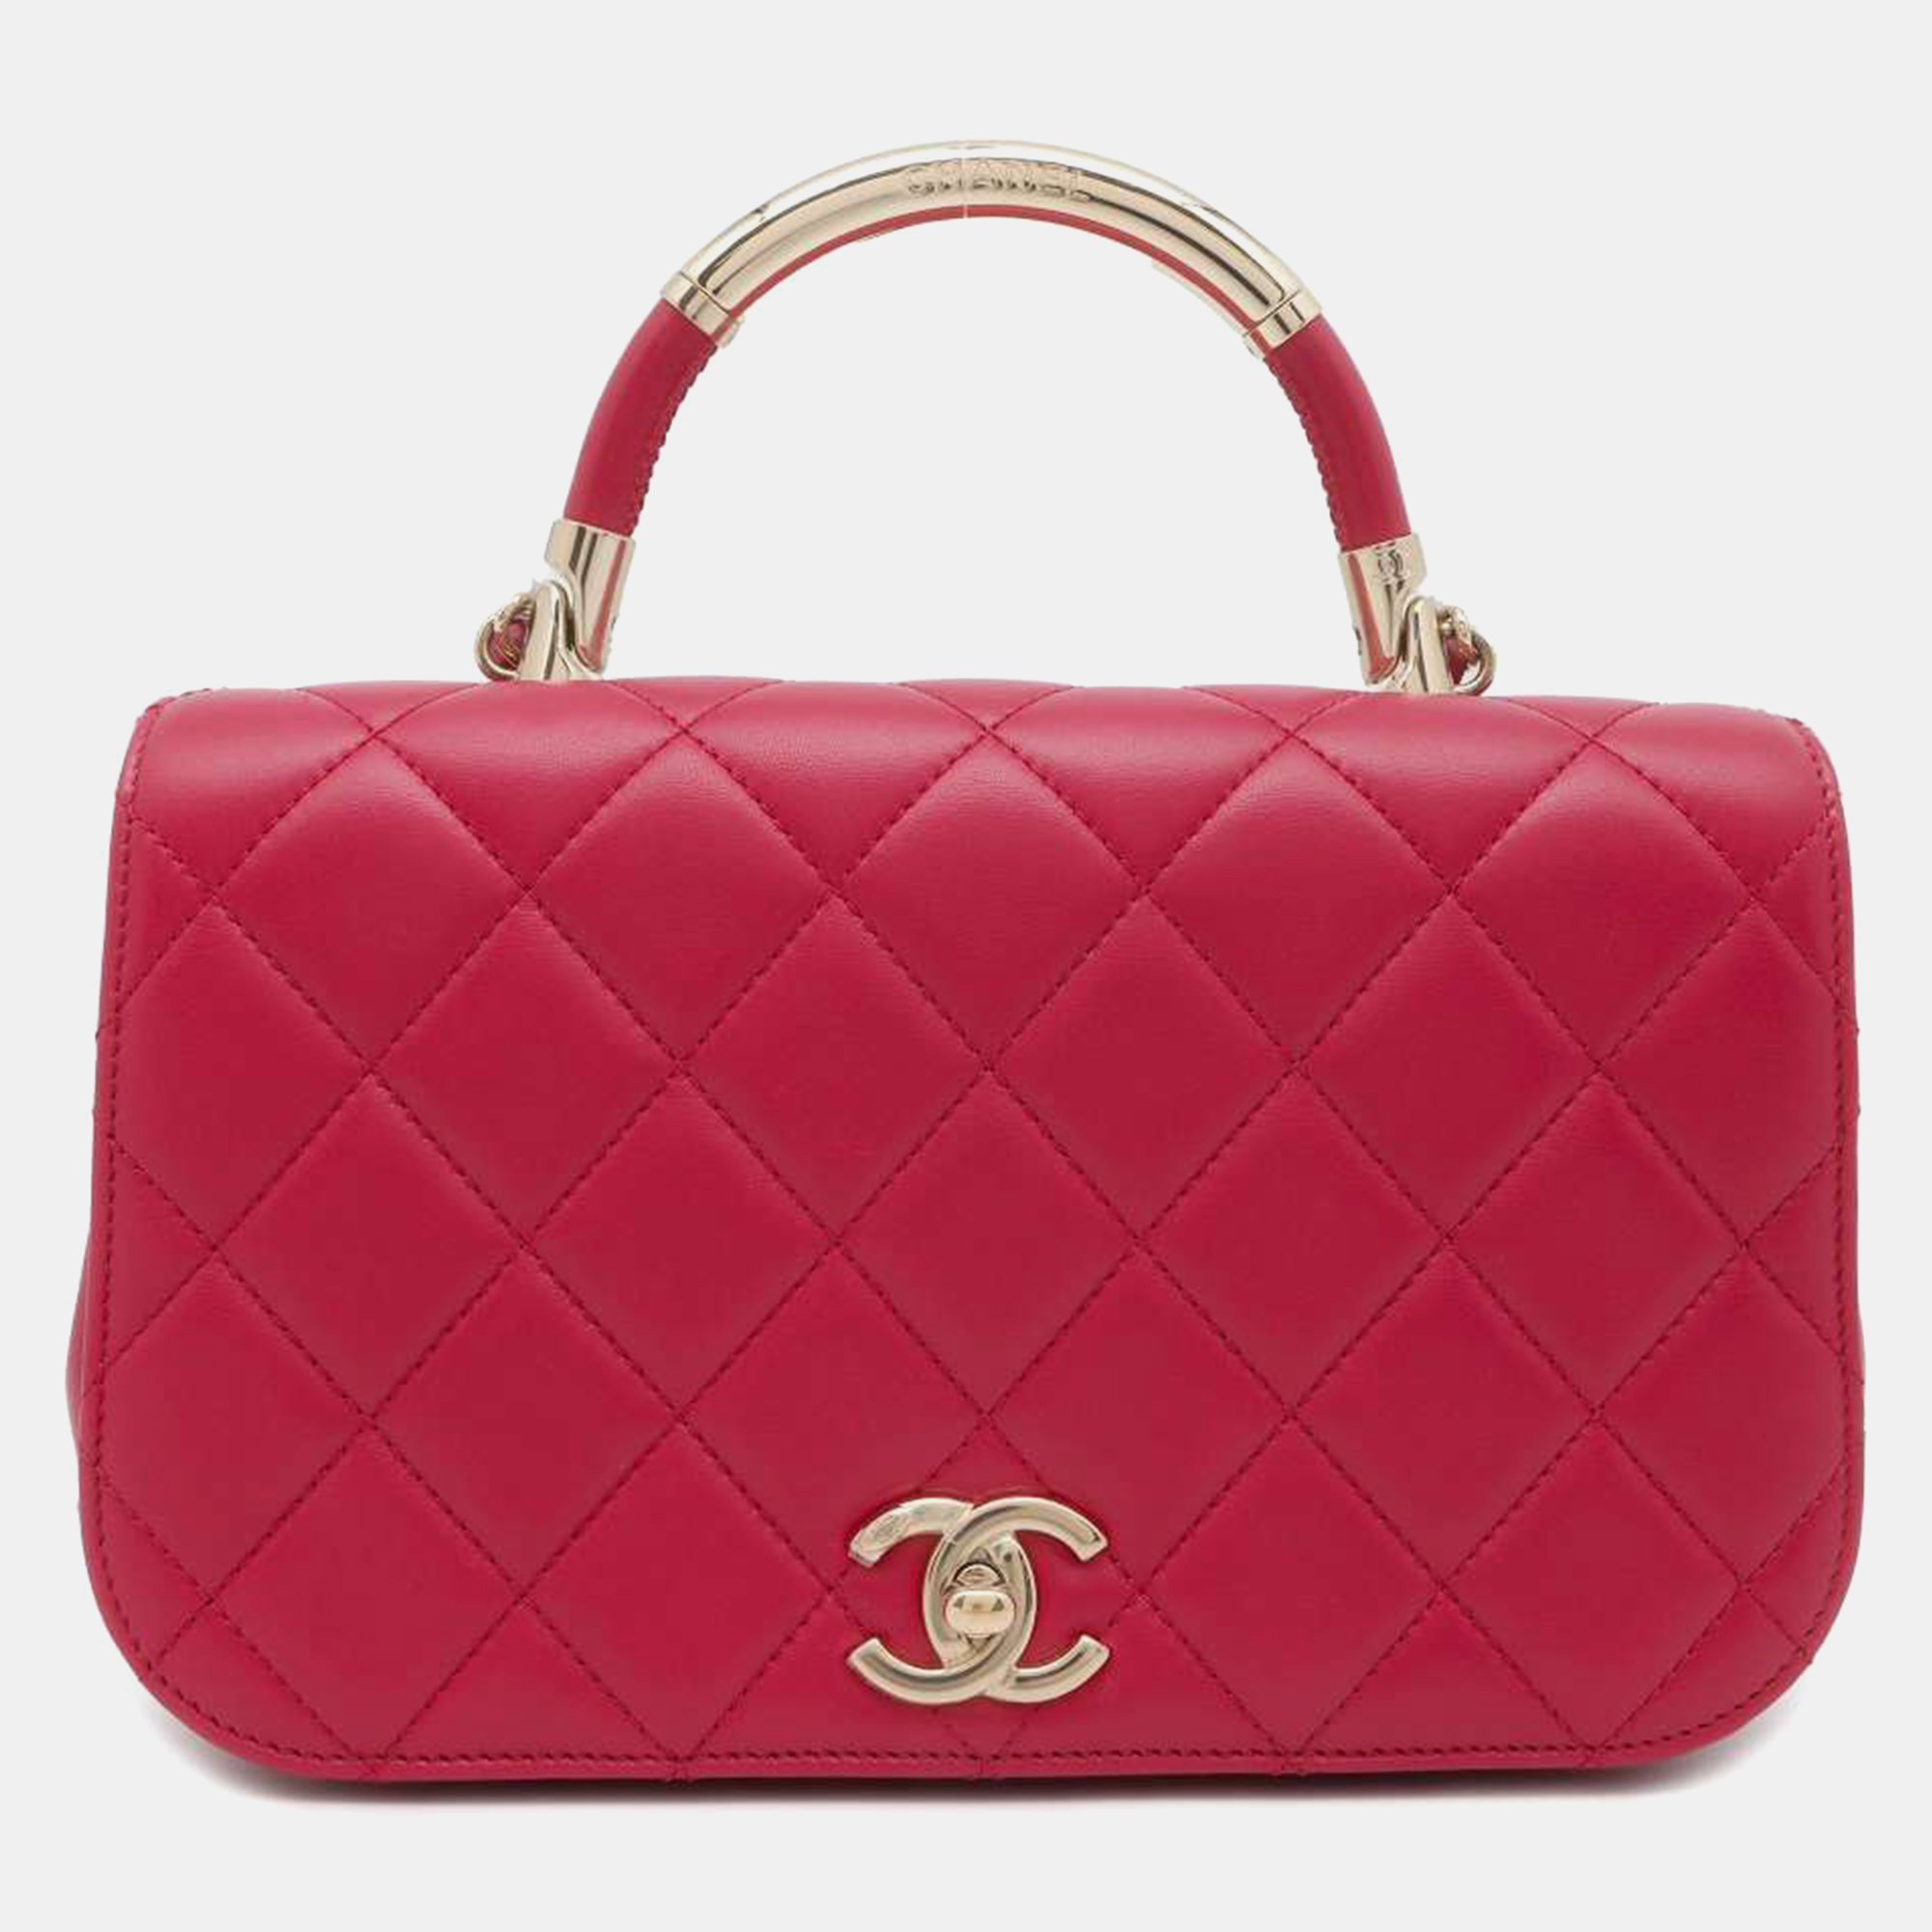 

Chanel Pink Lambskin Leather CC Top Handle Bag